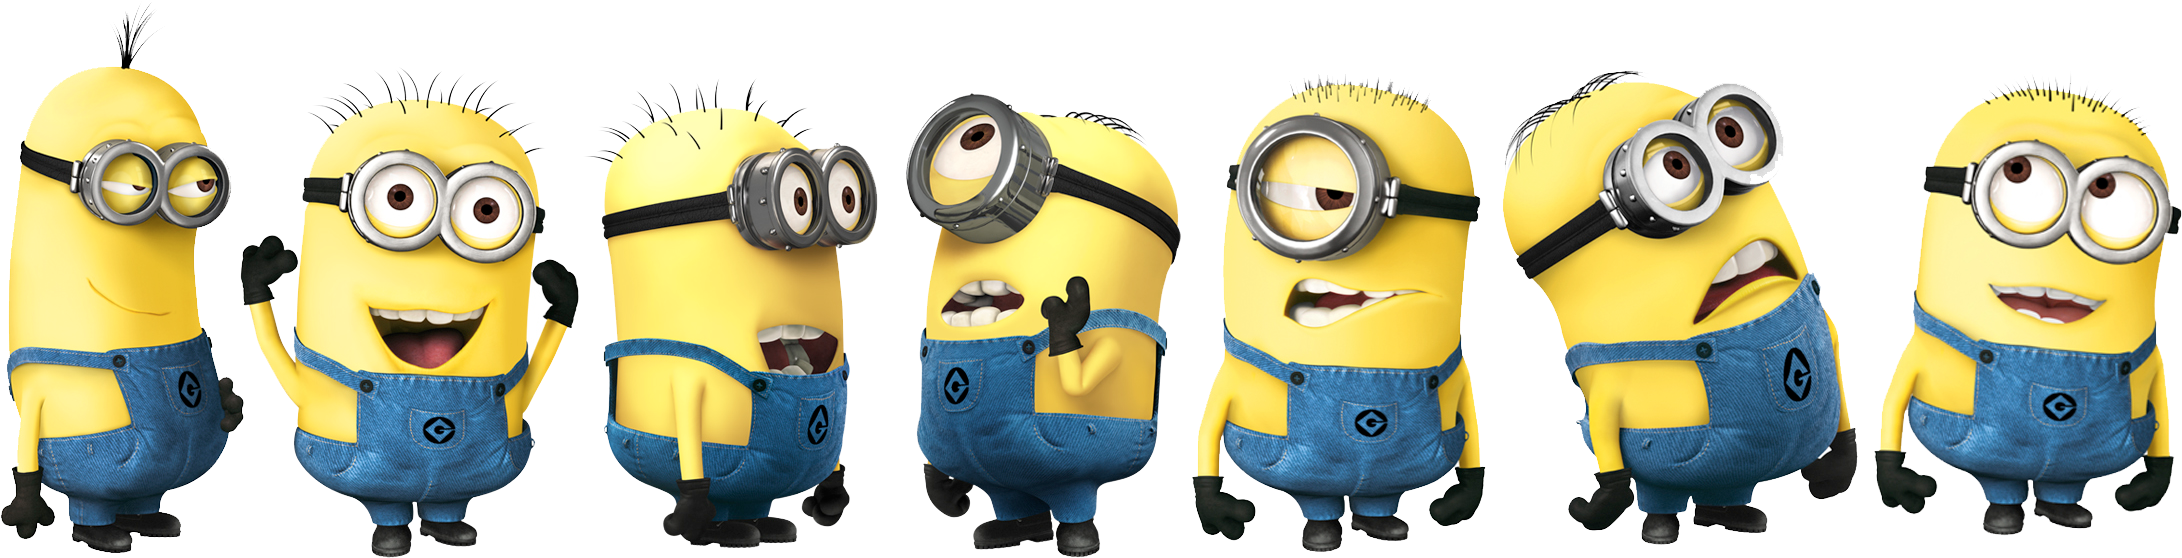 outdoor, minion, love Png images gallery